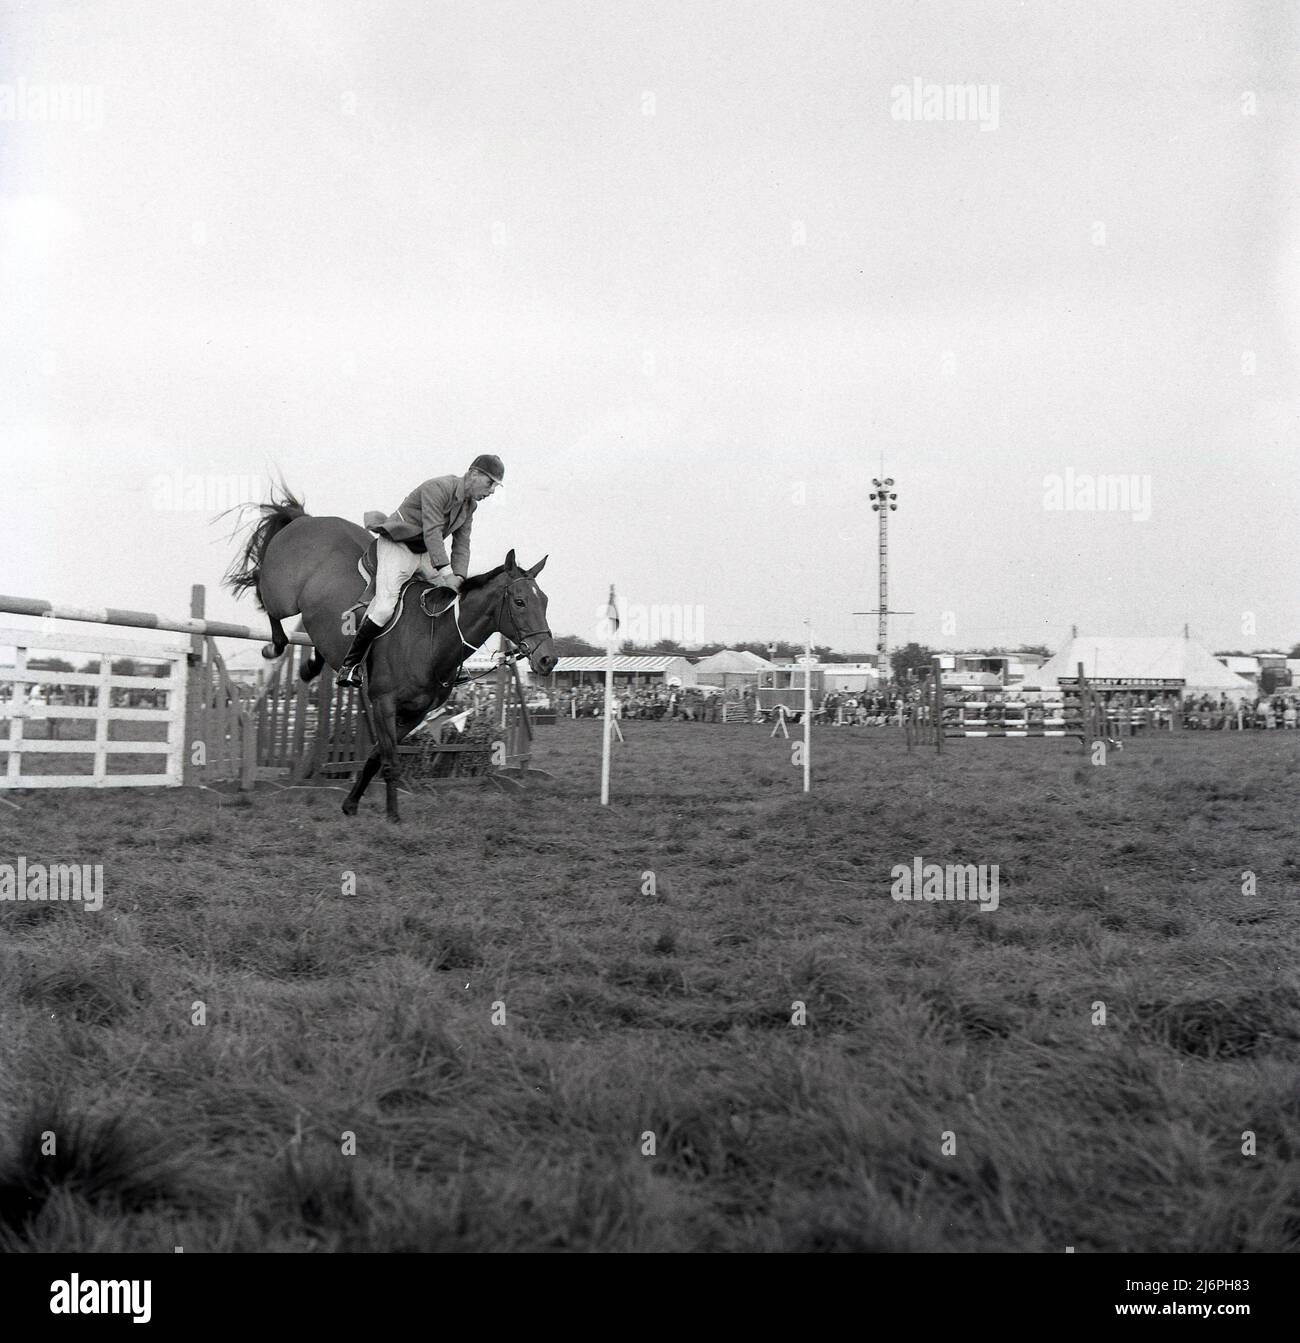 1967, historical, male show jumper, Peter Robeson having just jumped a fence or obstacle on the equestrian course at the Bucks County Show, Buckinghamshire, England, UK. Robeson was a two-time British Olympic bronze medal winner, in the 1956 and 1964 summer Olympics games. Stock Photo